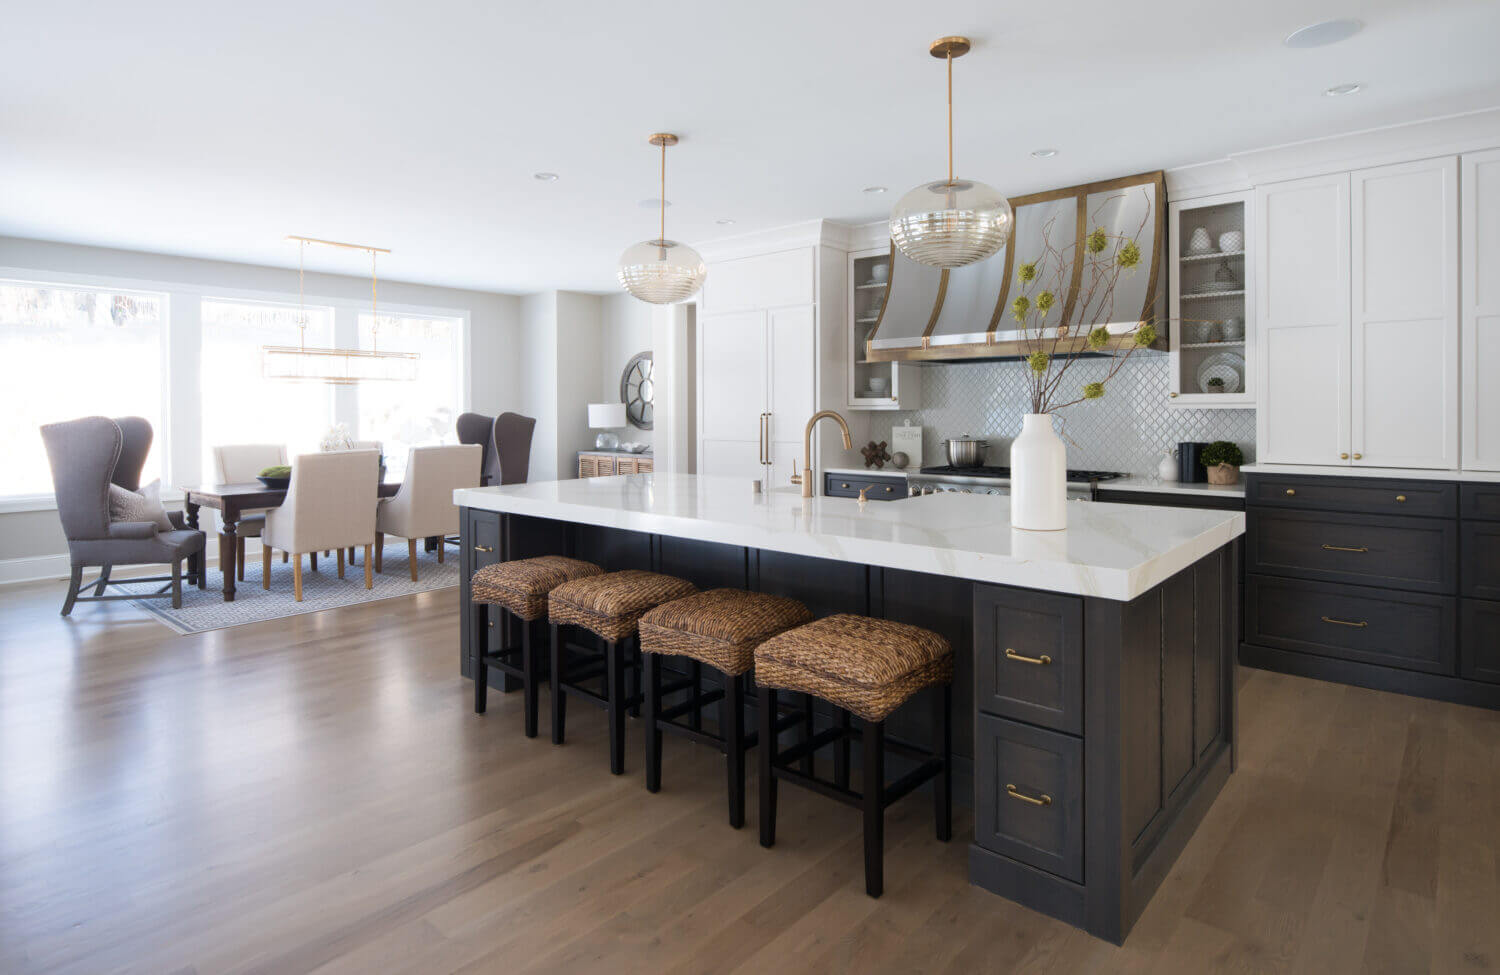 A soft black and white kitchen design with dark gray stained oak for the base cabinets and bright white paint for the wall cabinets and appliance panels. Brass hardware, light fixtures, and metal hood are used as accents throughout.